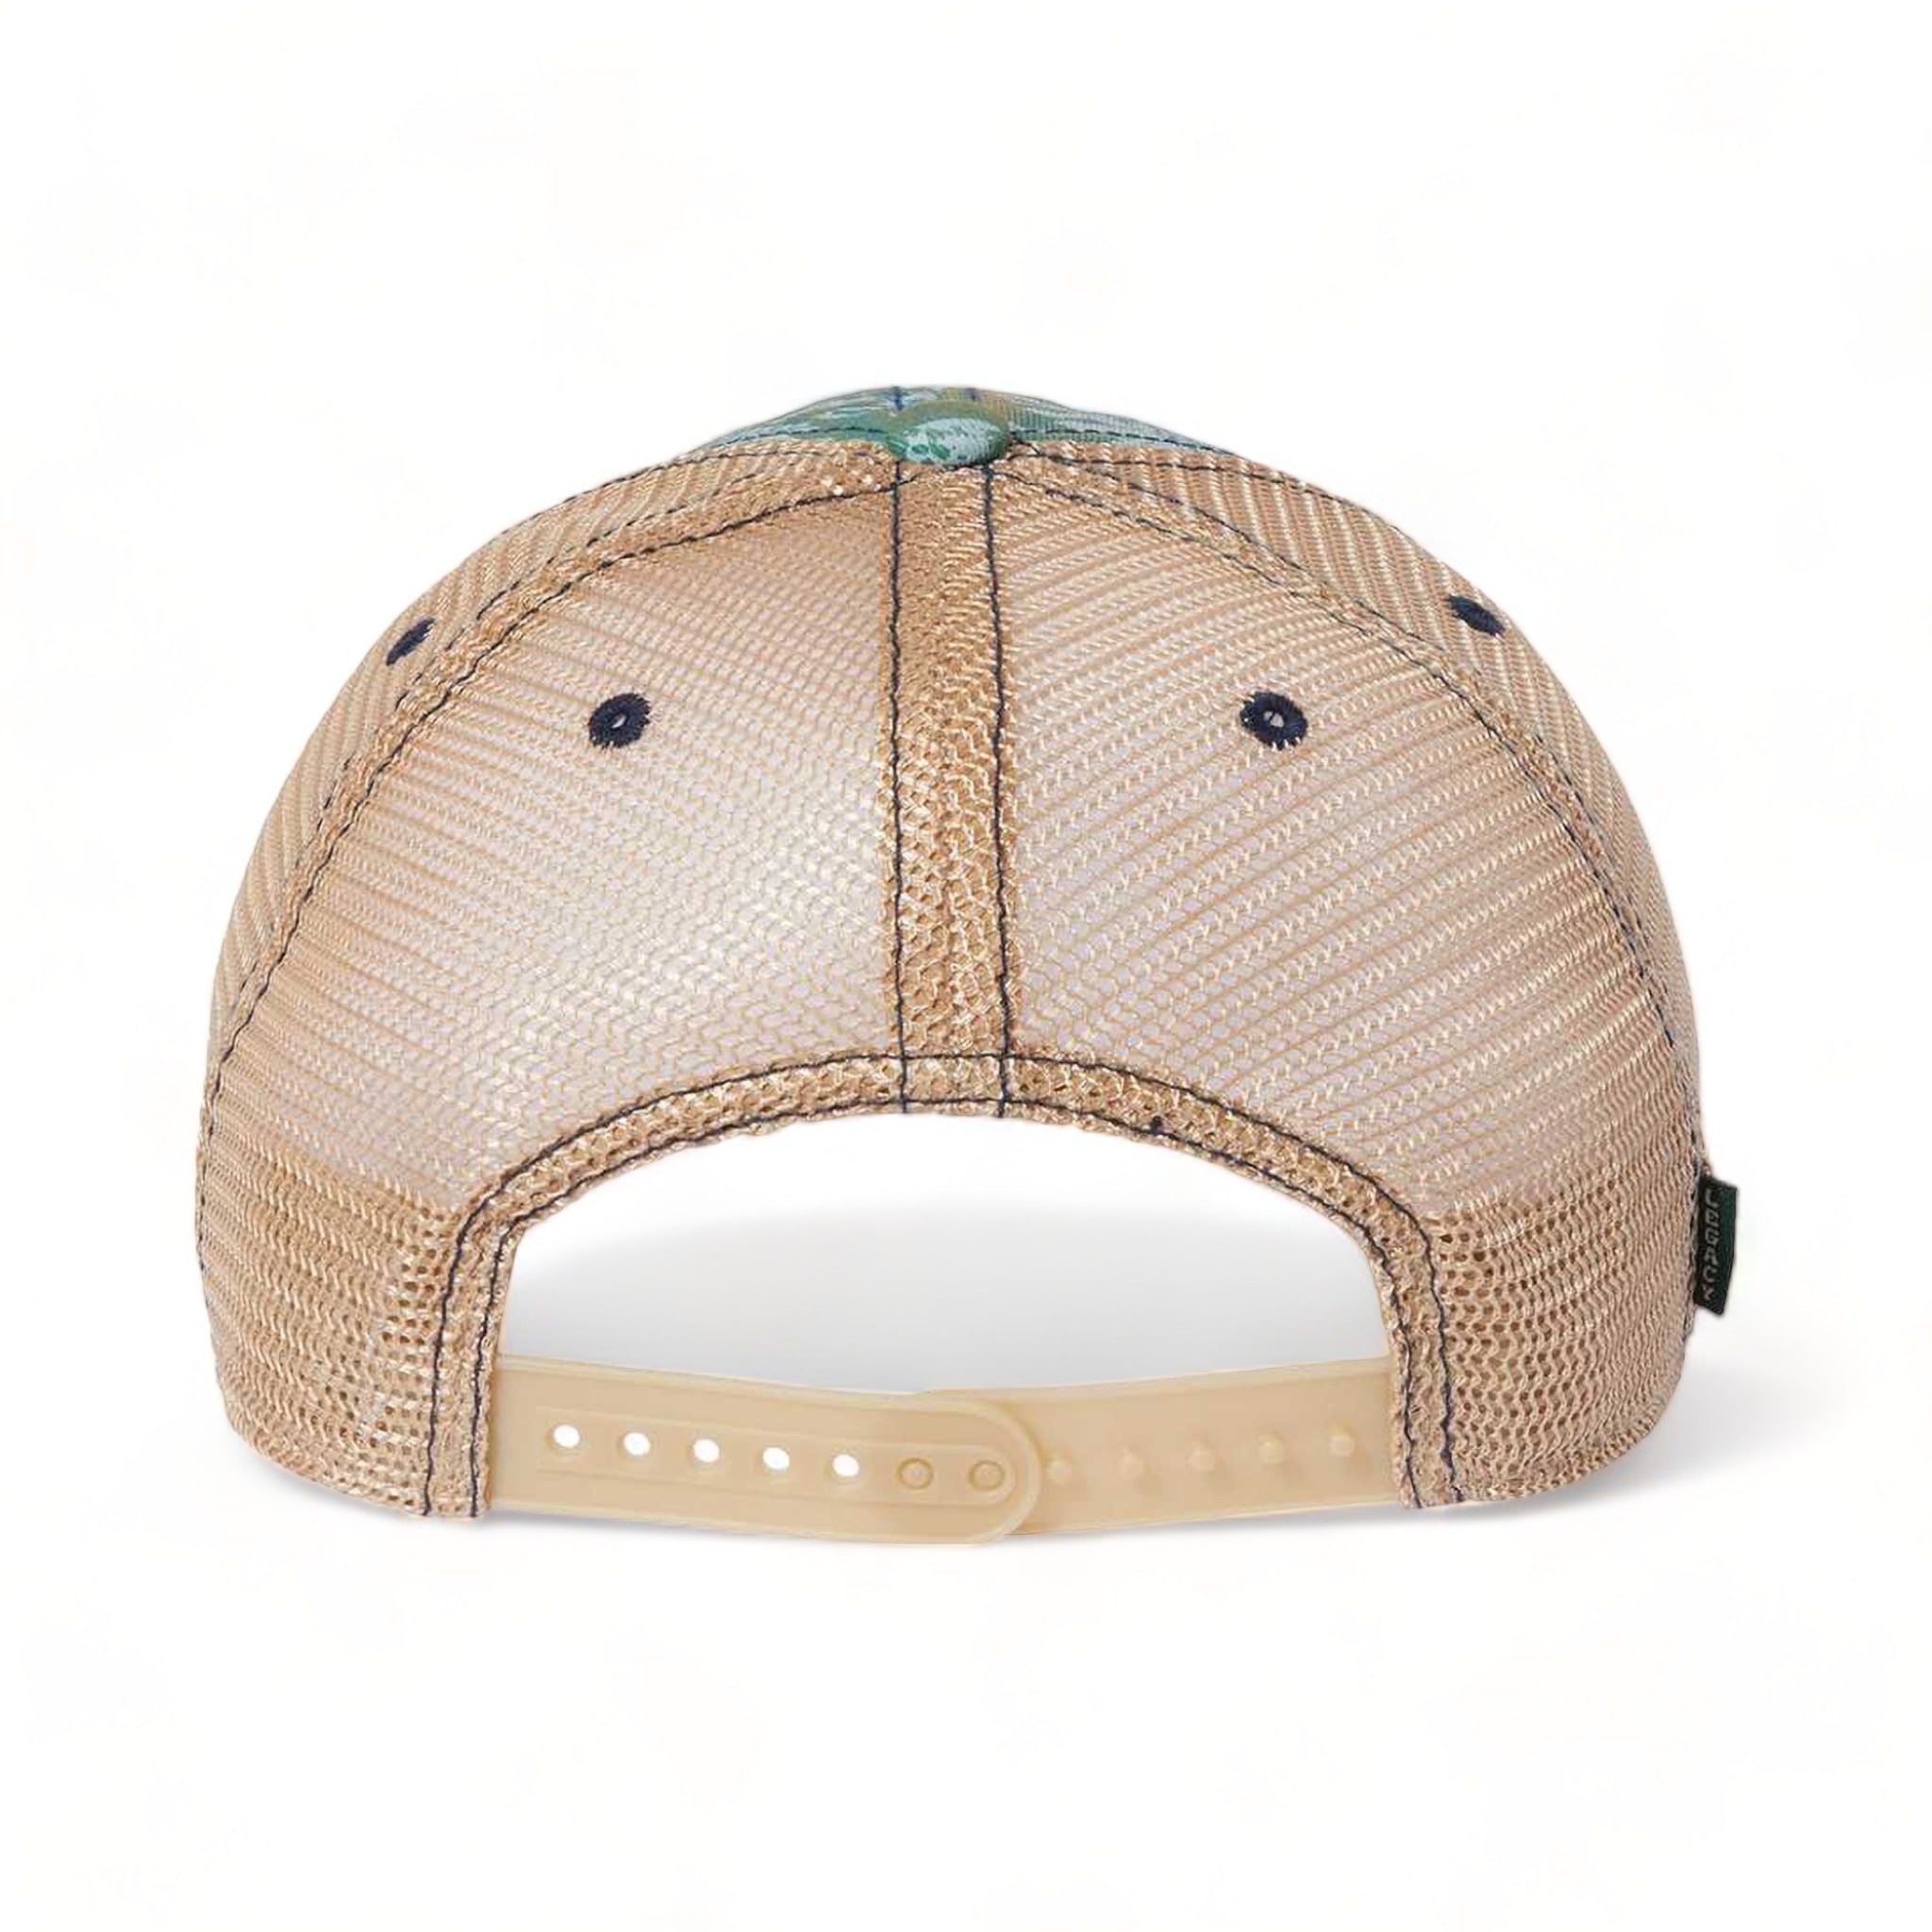 Back view of LEGACY OFA custom hat in green palm and khaki